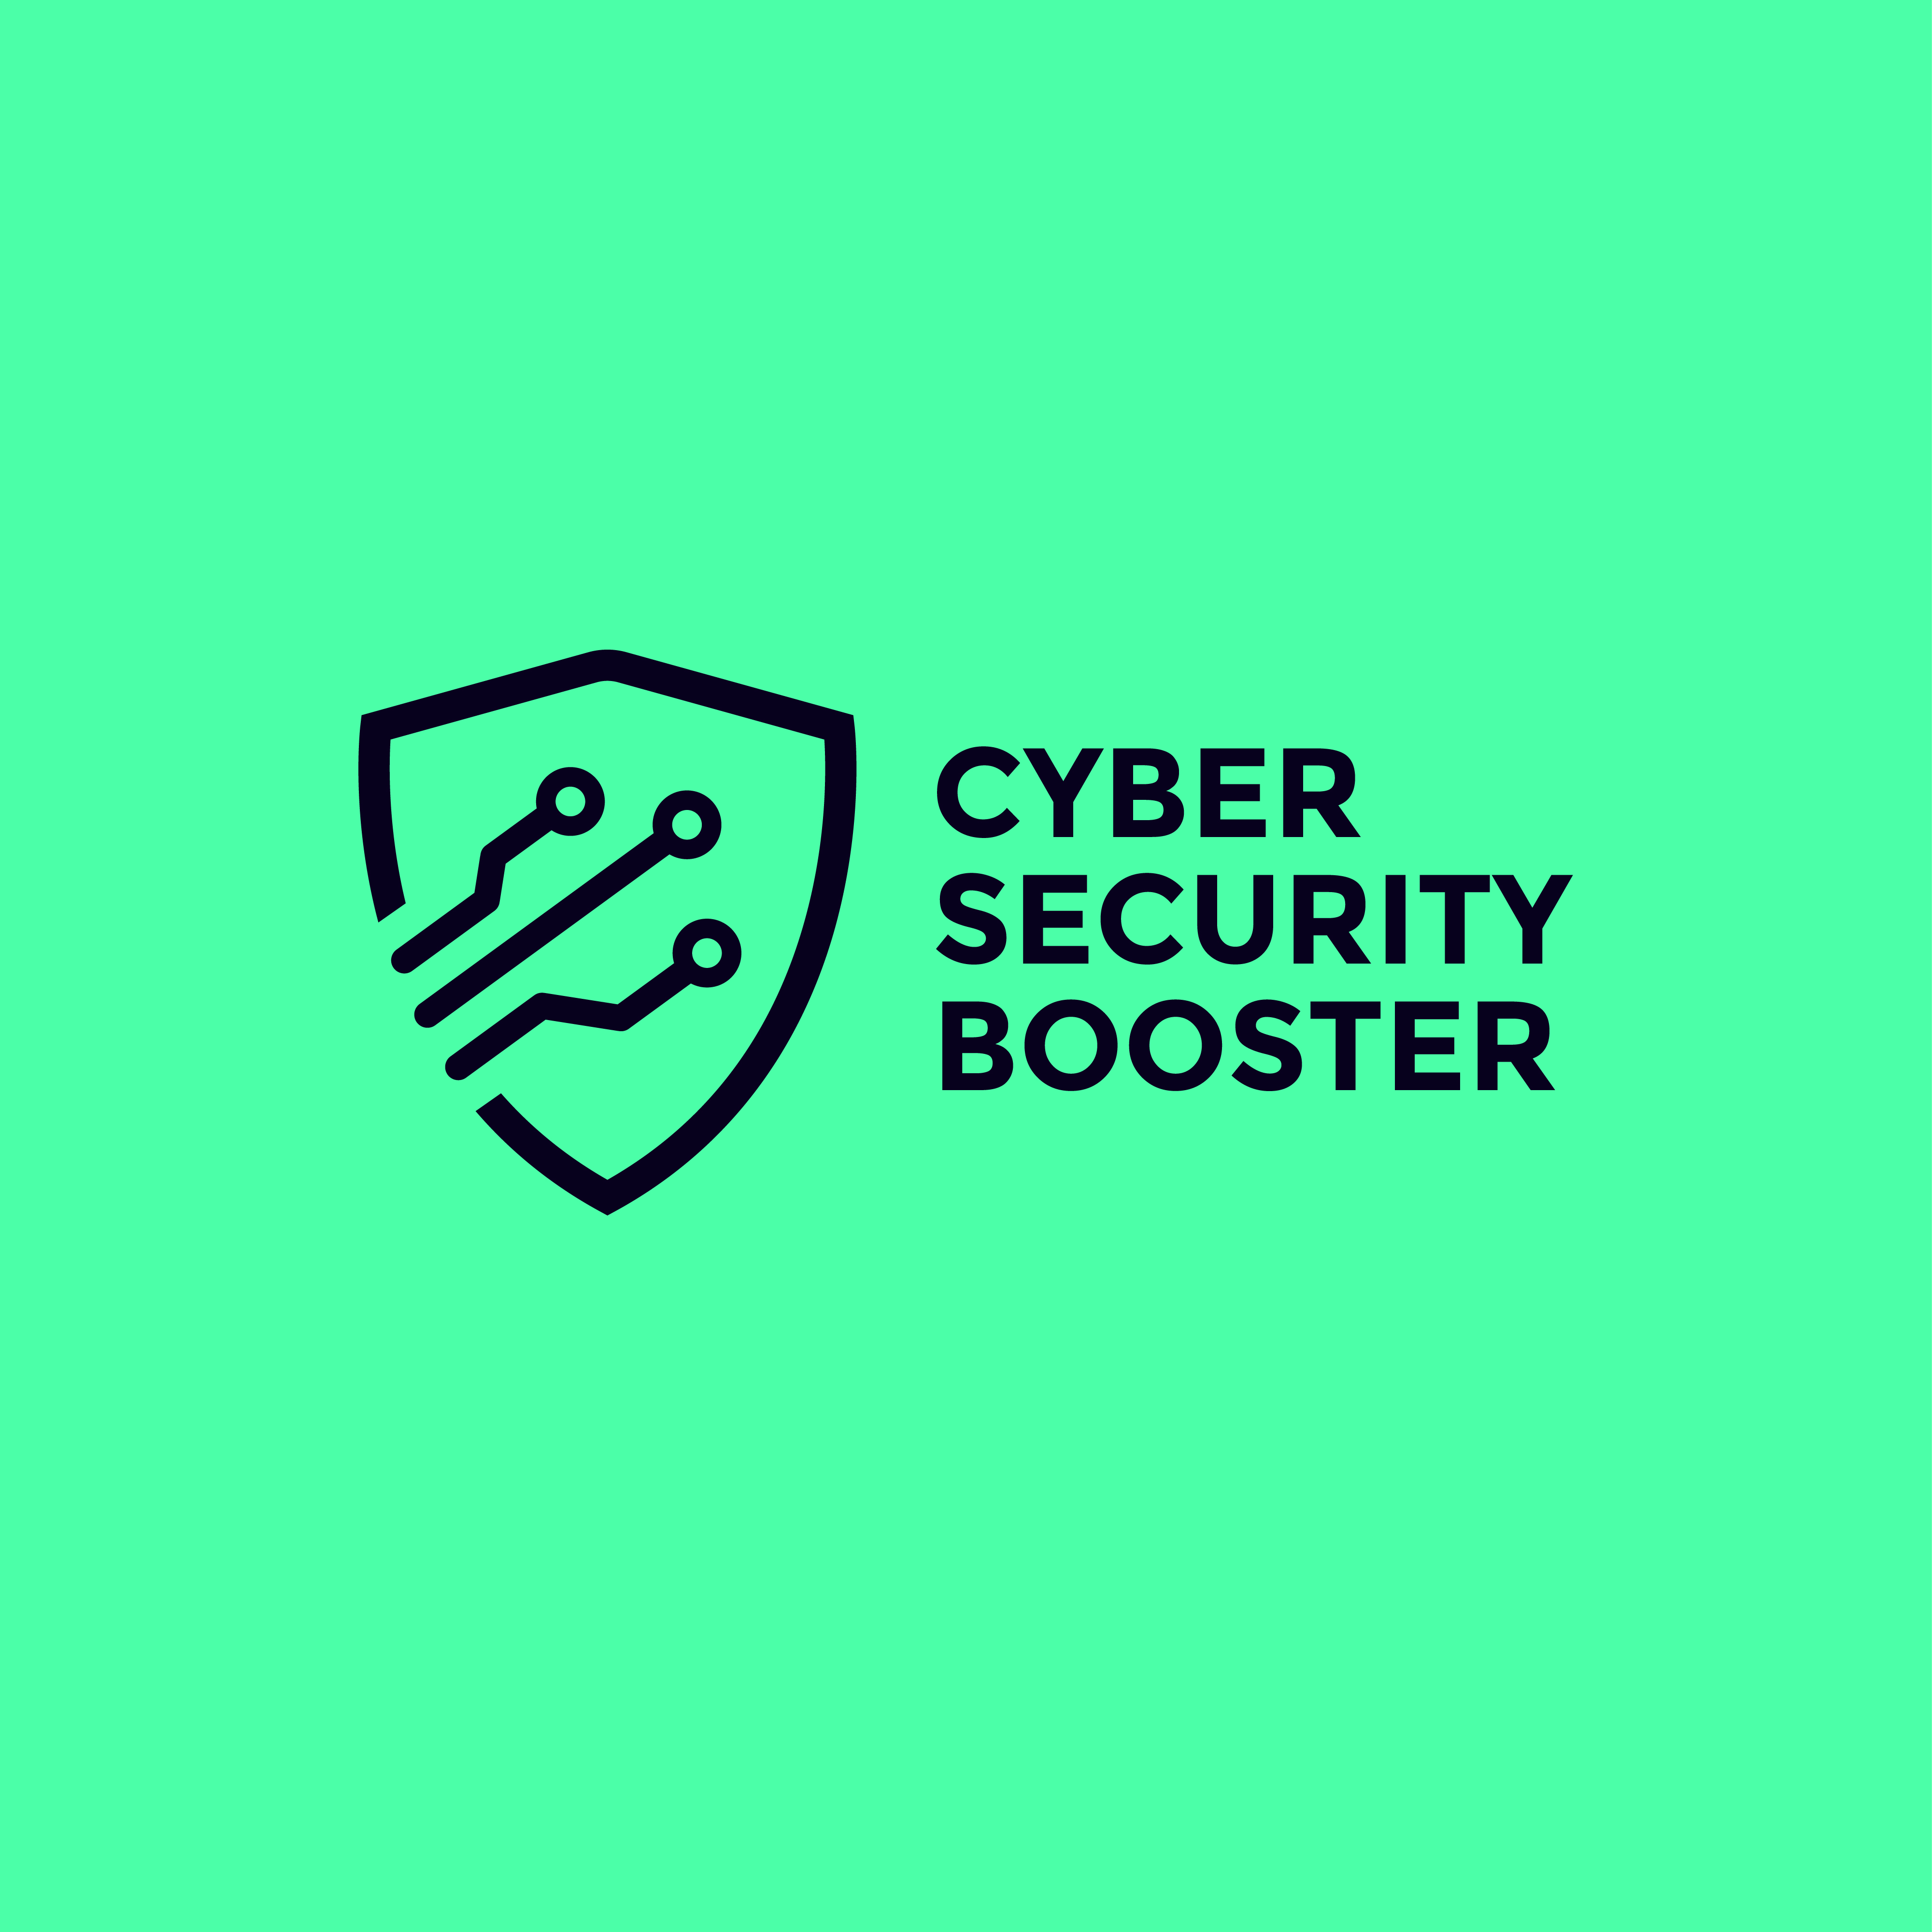 Cyber Security Booster logo